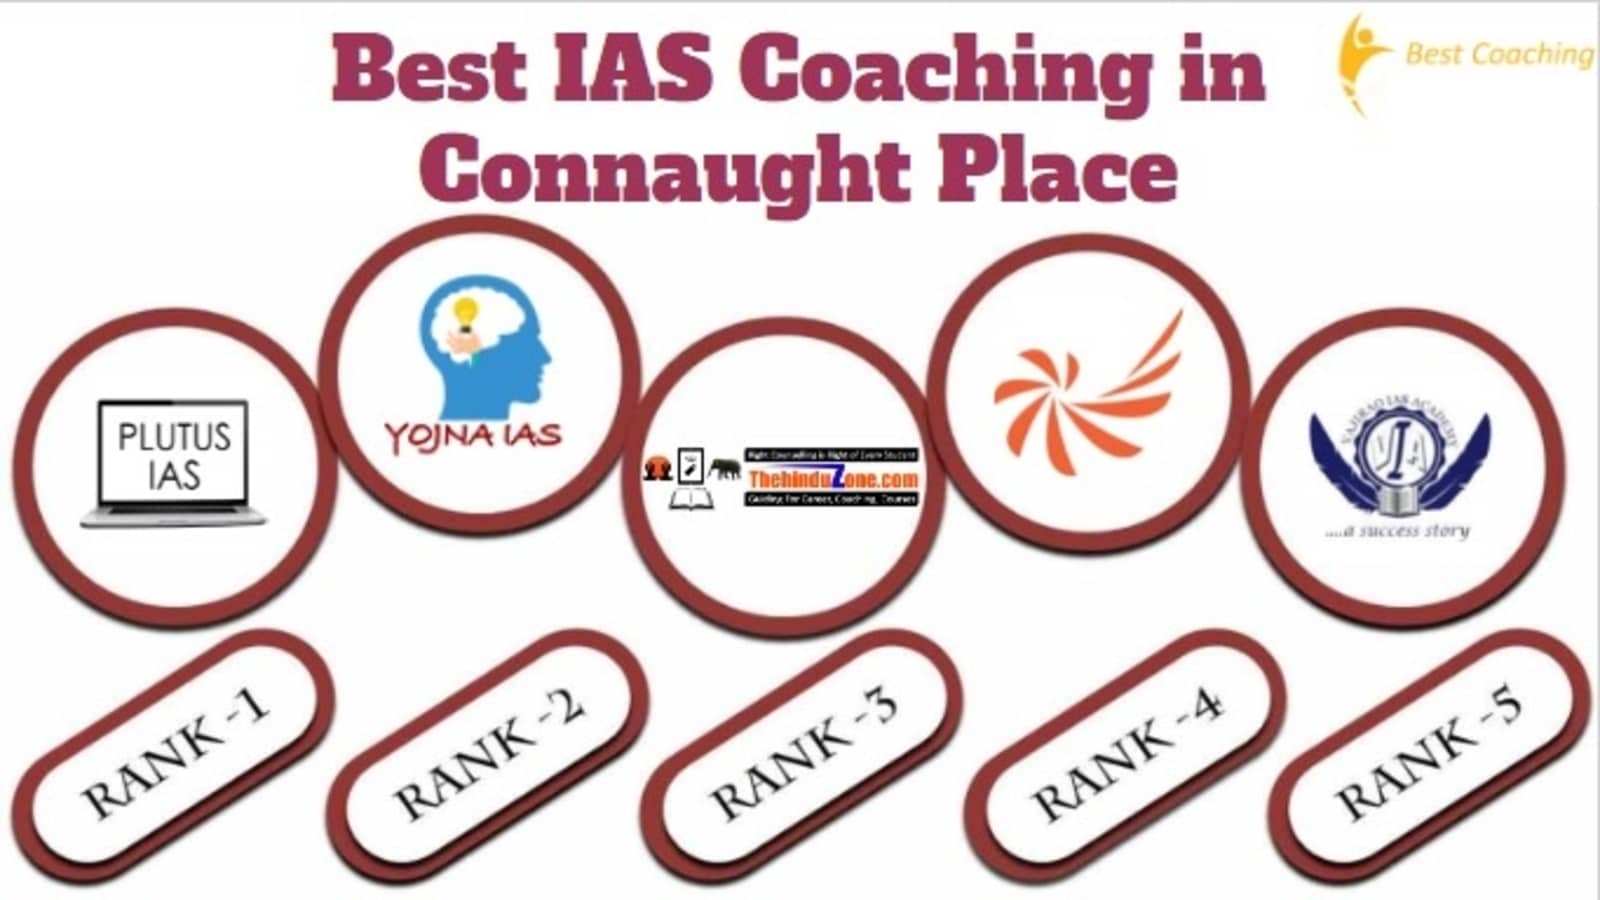 Best IAS Coaching in Connaught Place